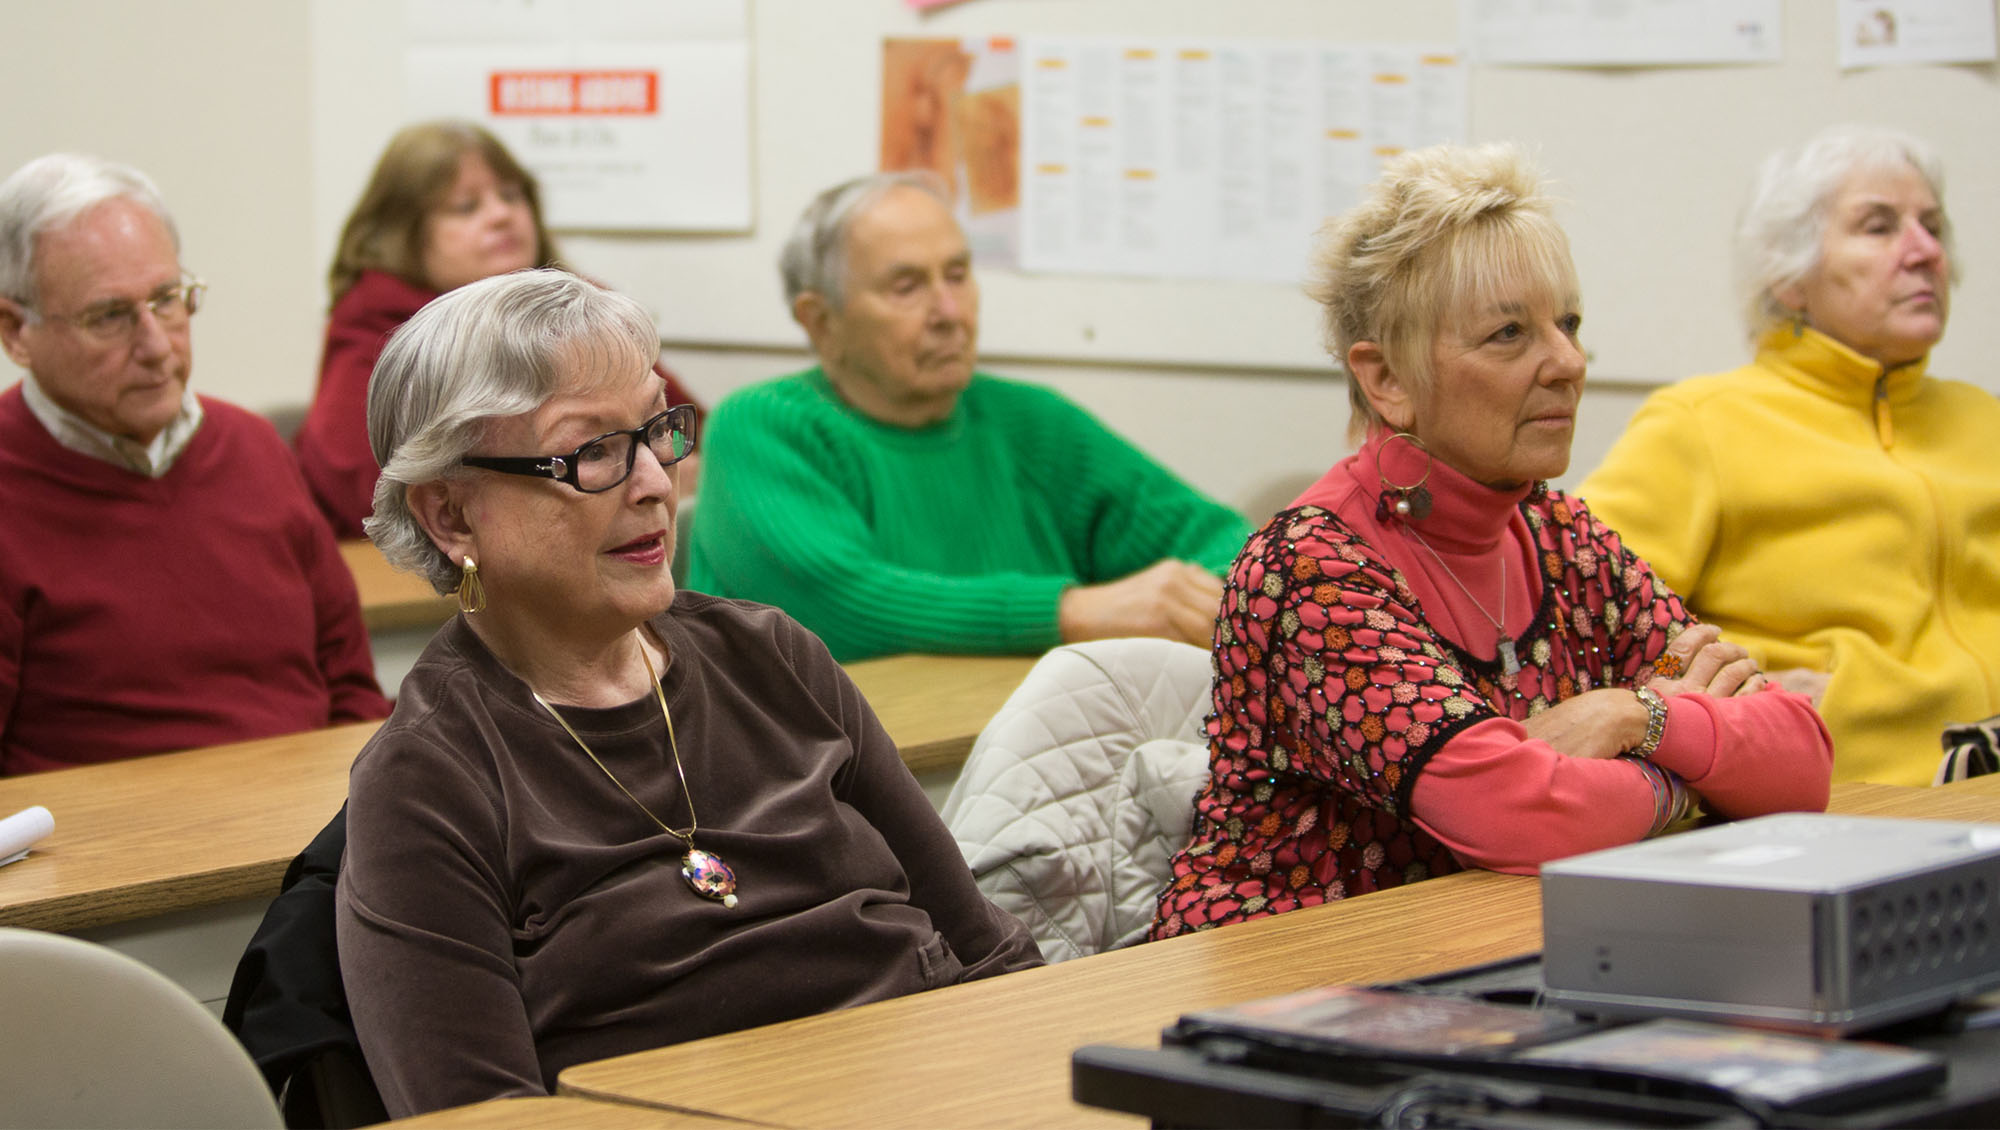 Older adults participating in an Osher Lifelong Learning Institute (OLLI) class at Sierra College